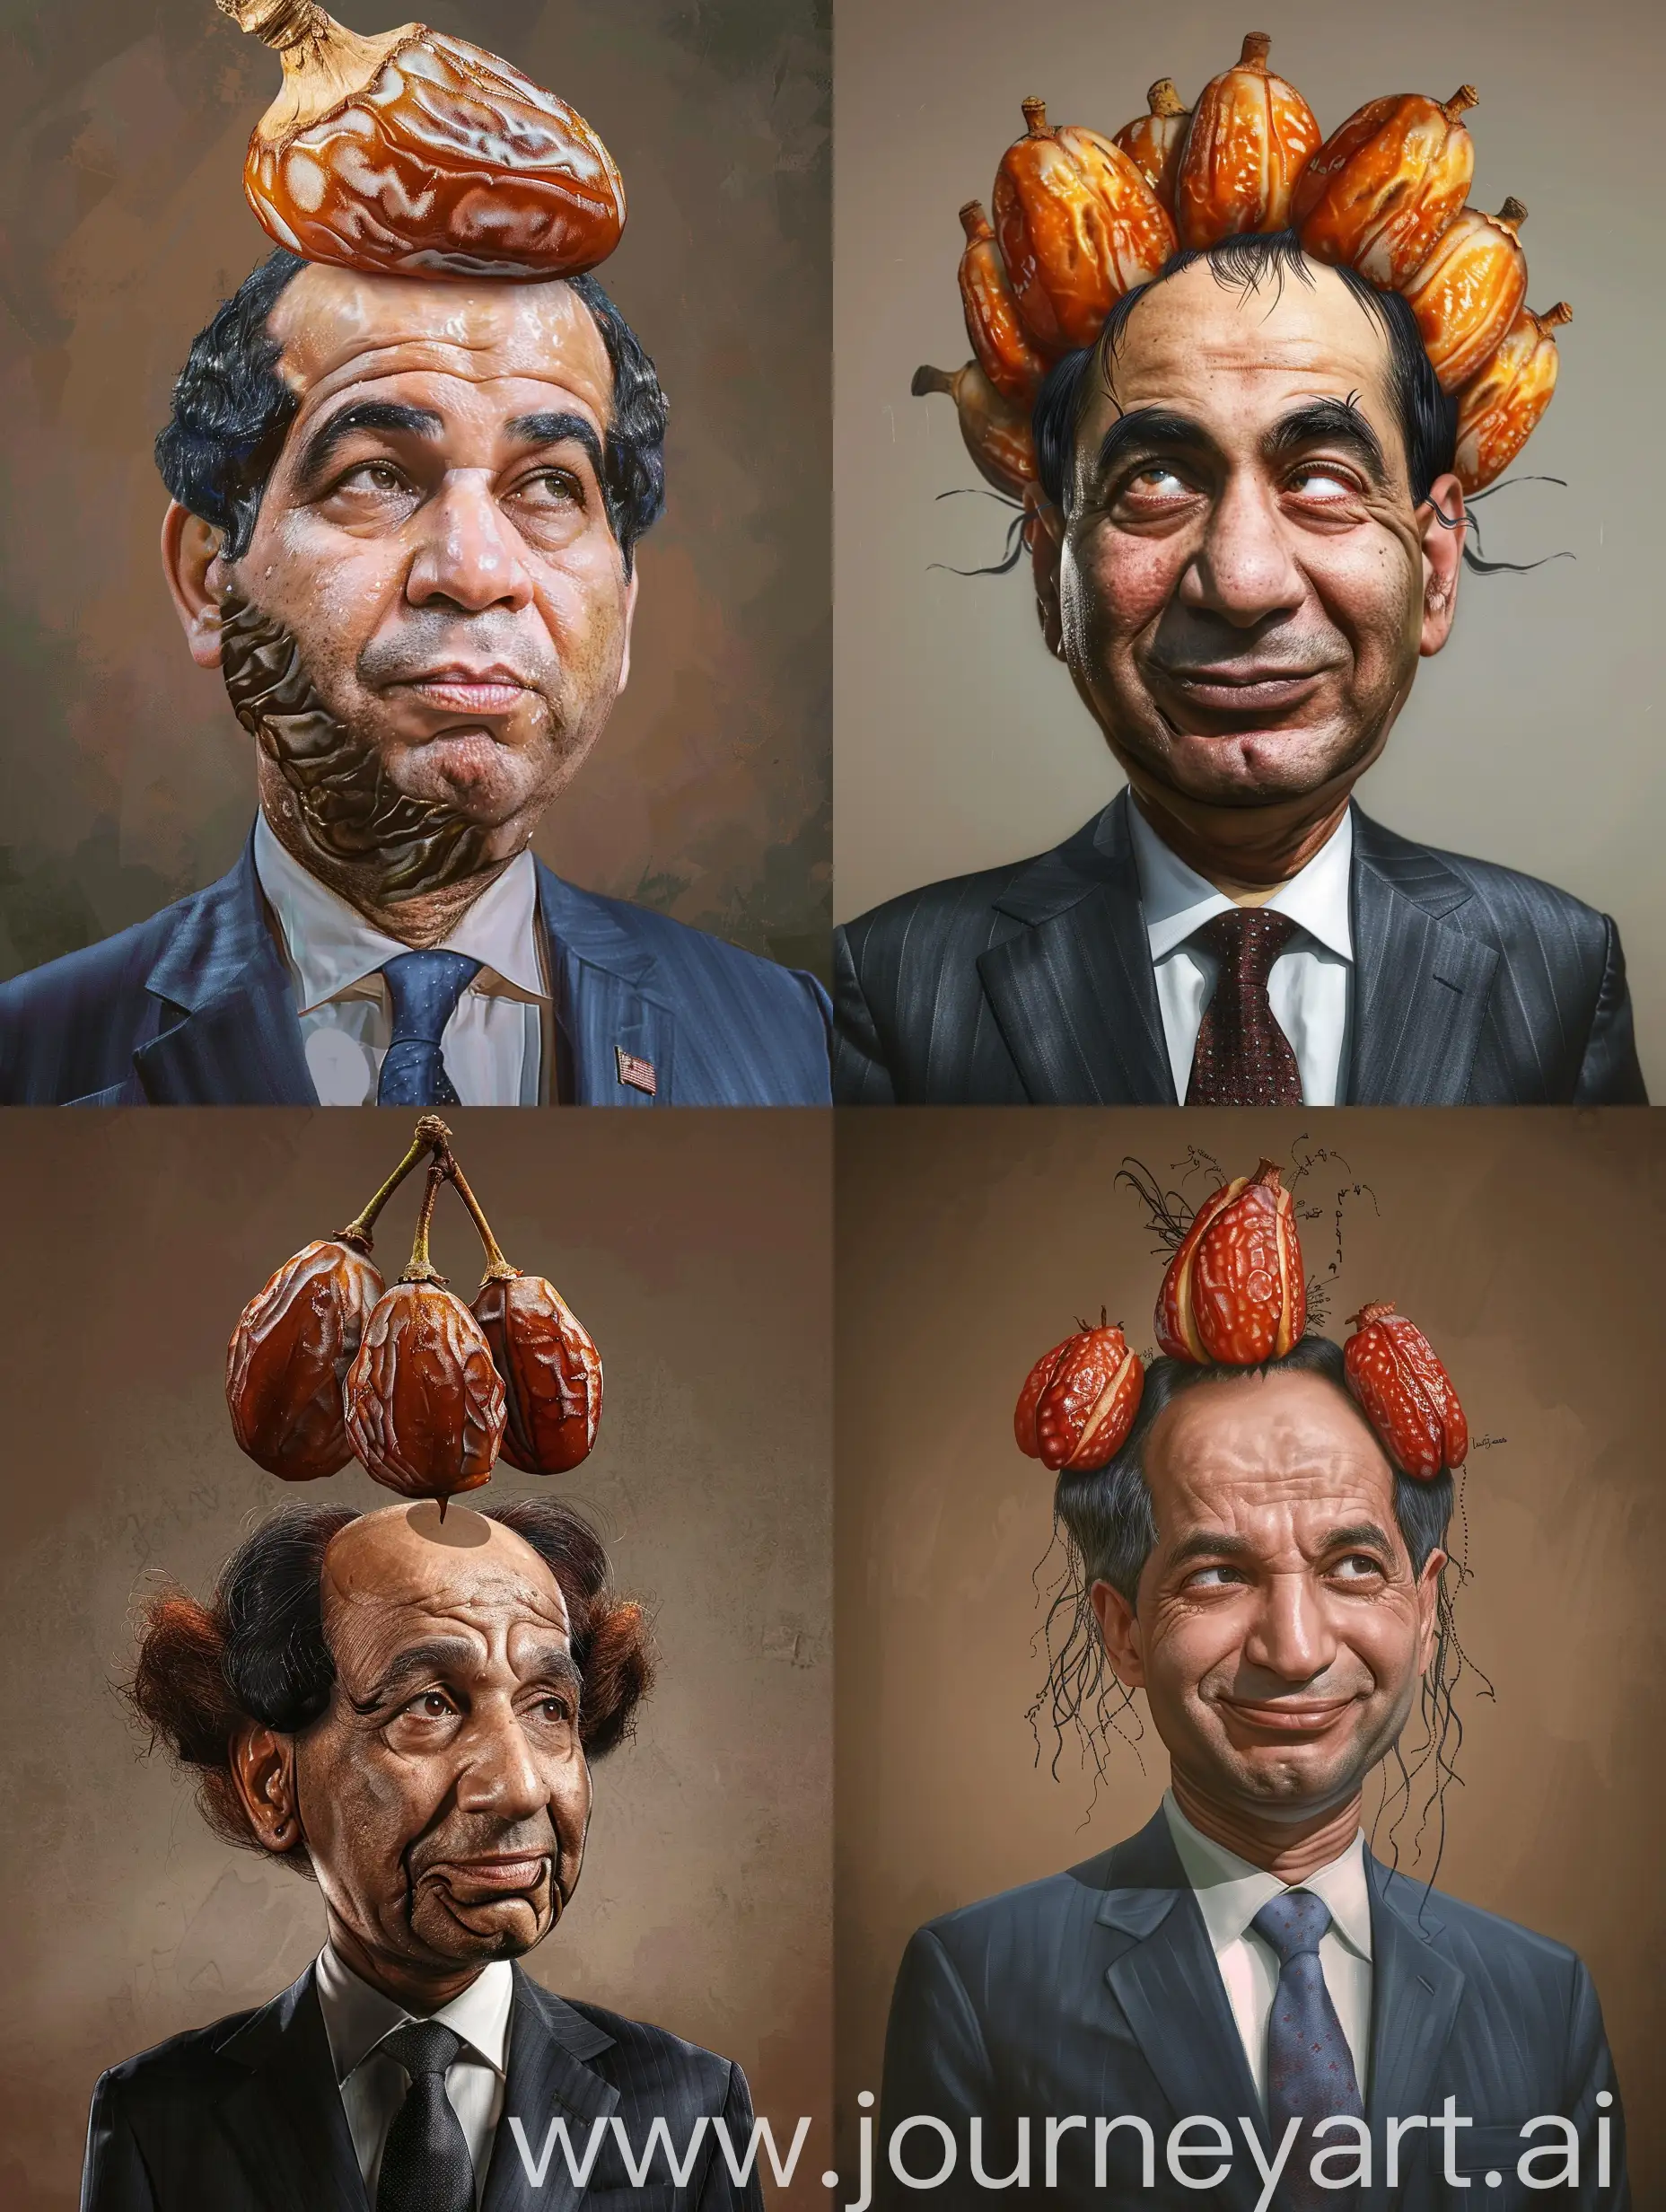 Construct an image of abdel fattah el sisi of having his head as the dates fruit and having his hair style is the same

